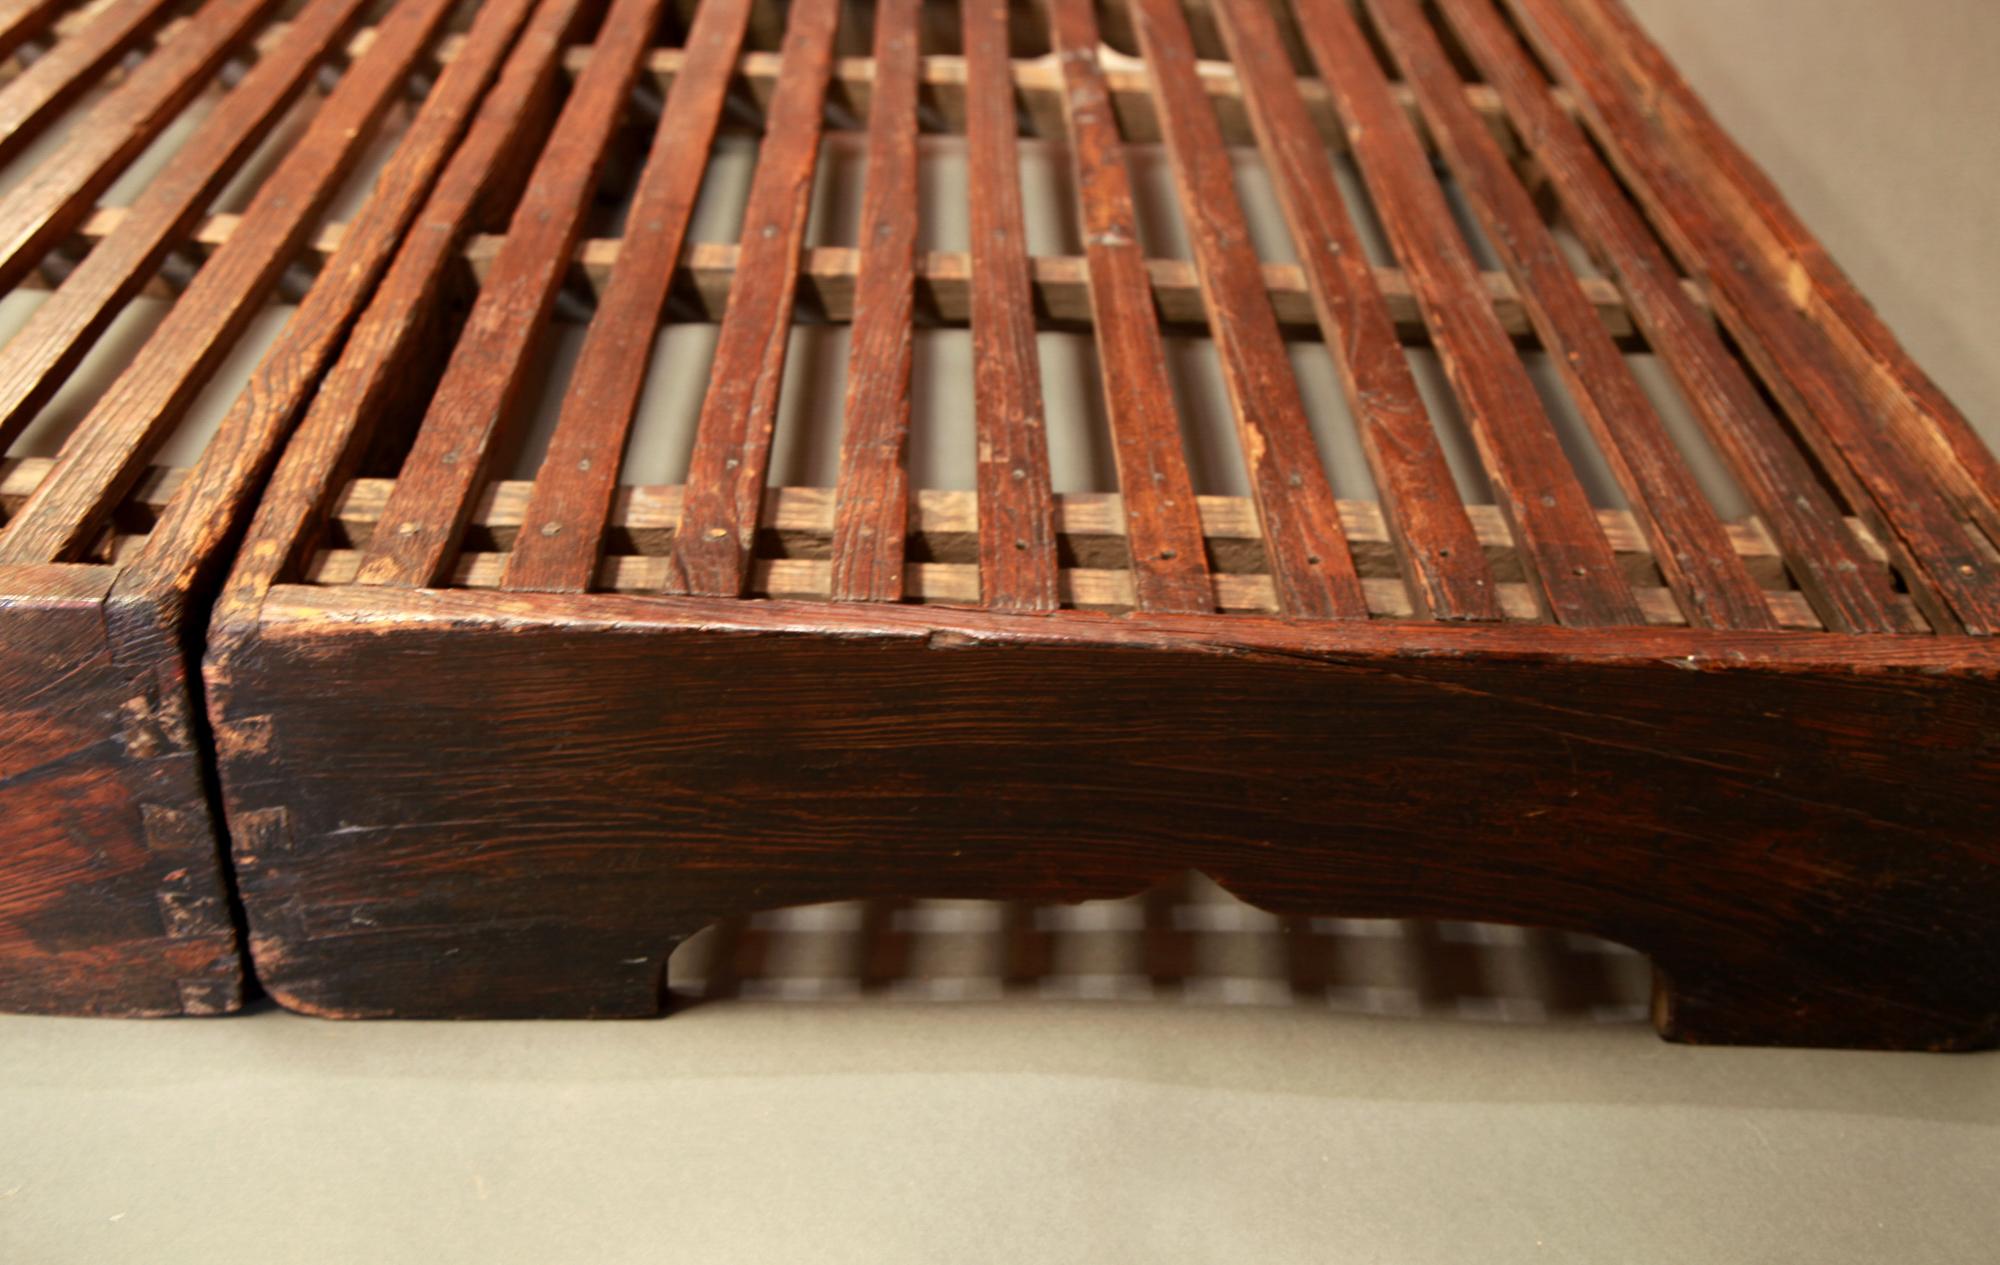 Other Early 20th Century Two-Piece Korean Summer Wooden Bed